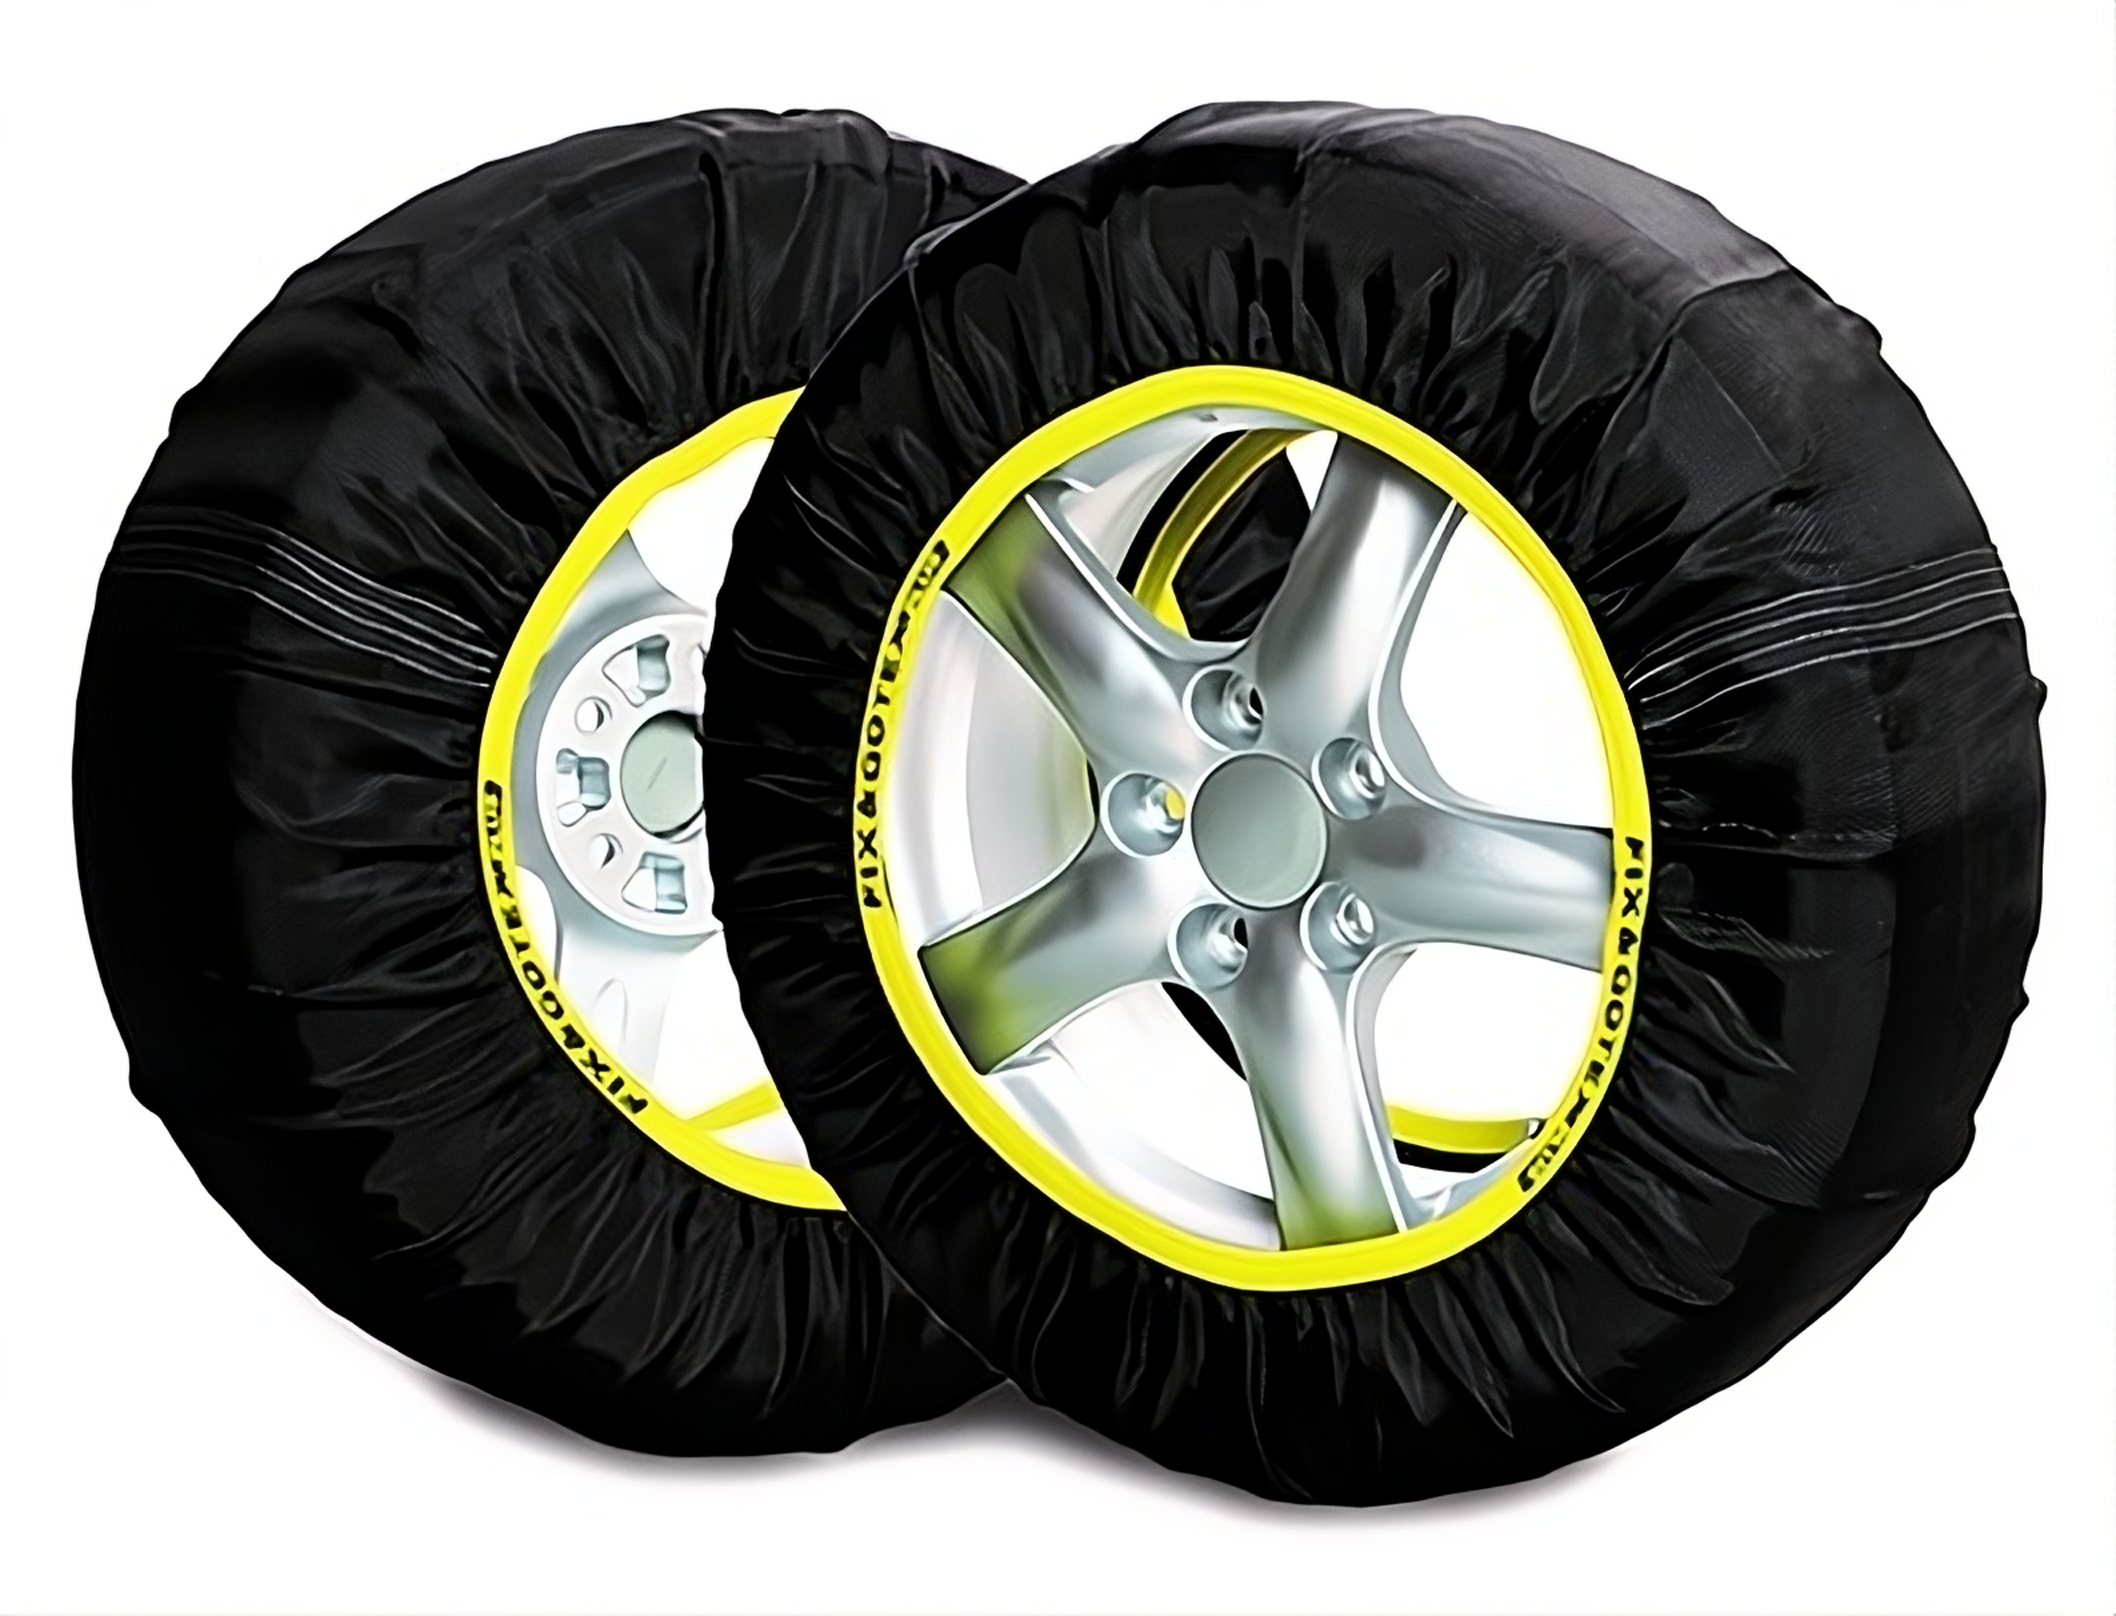 205 - 205/60R16 Utilitaire - Pro Chaines Neige